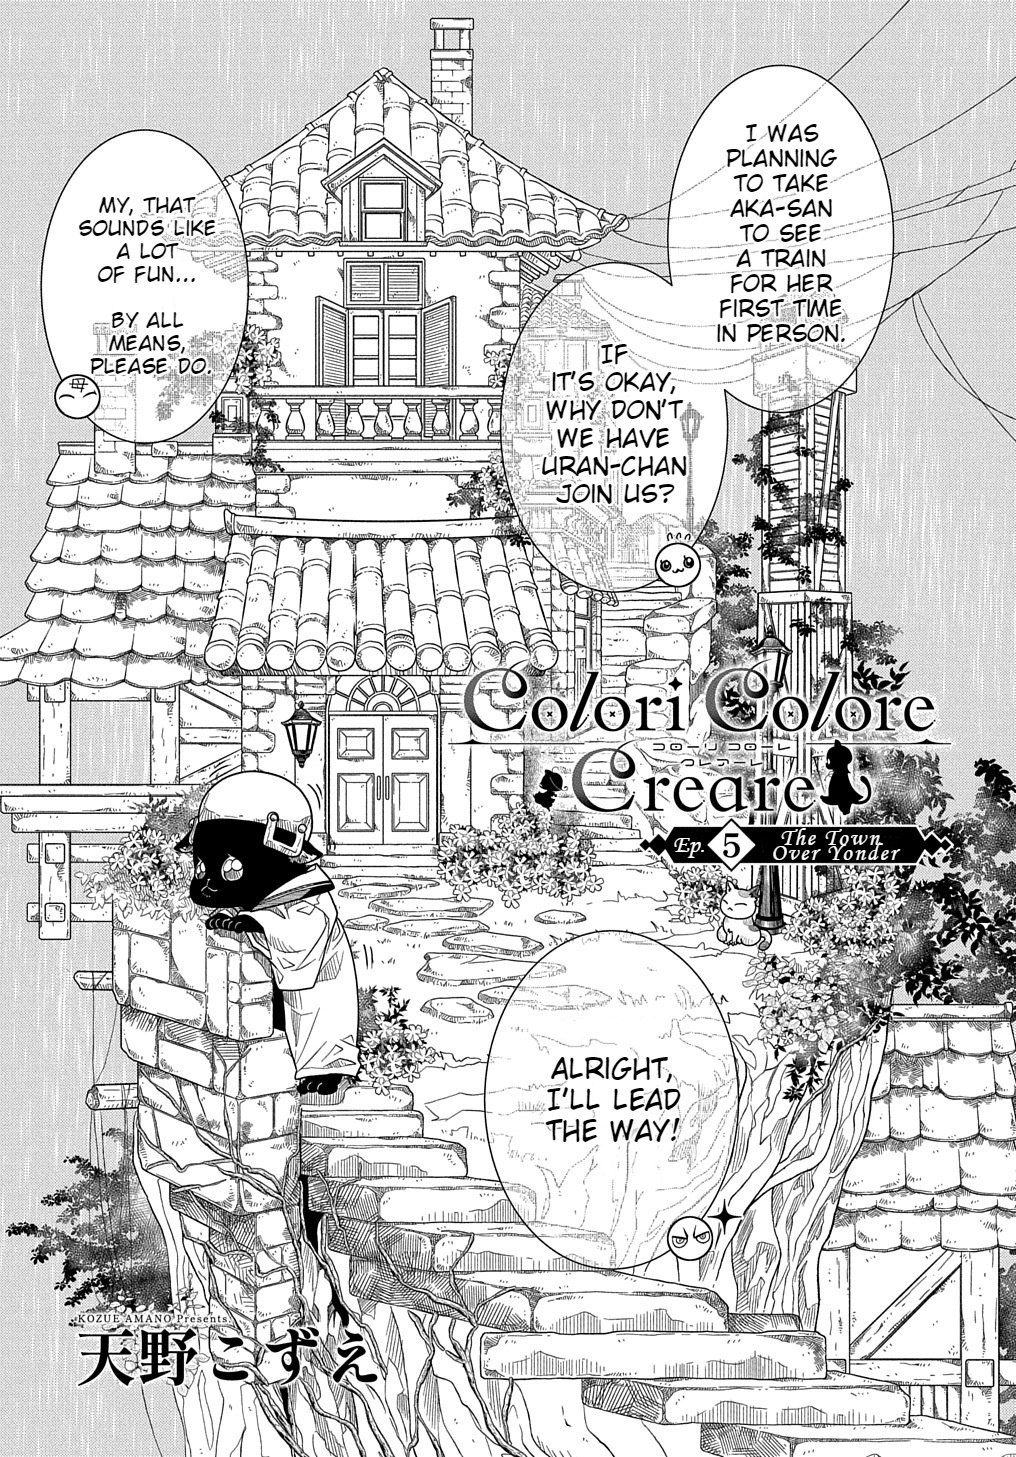 Colori Colore Creare Vol.1 Chapter 5: The Town Over Yonder - Picture 3